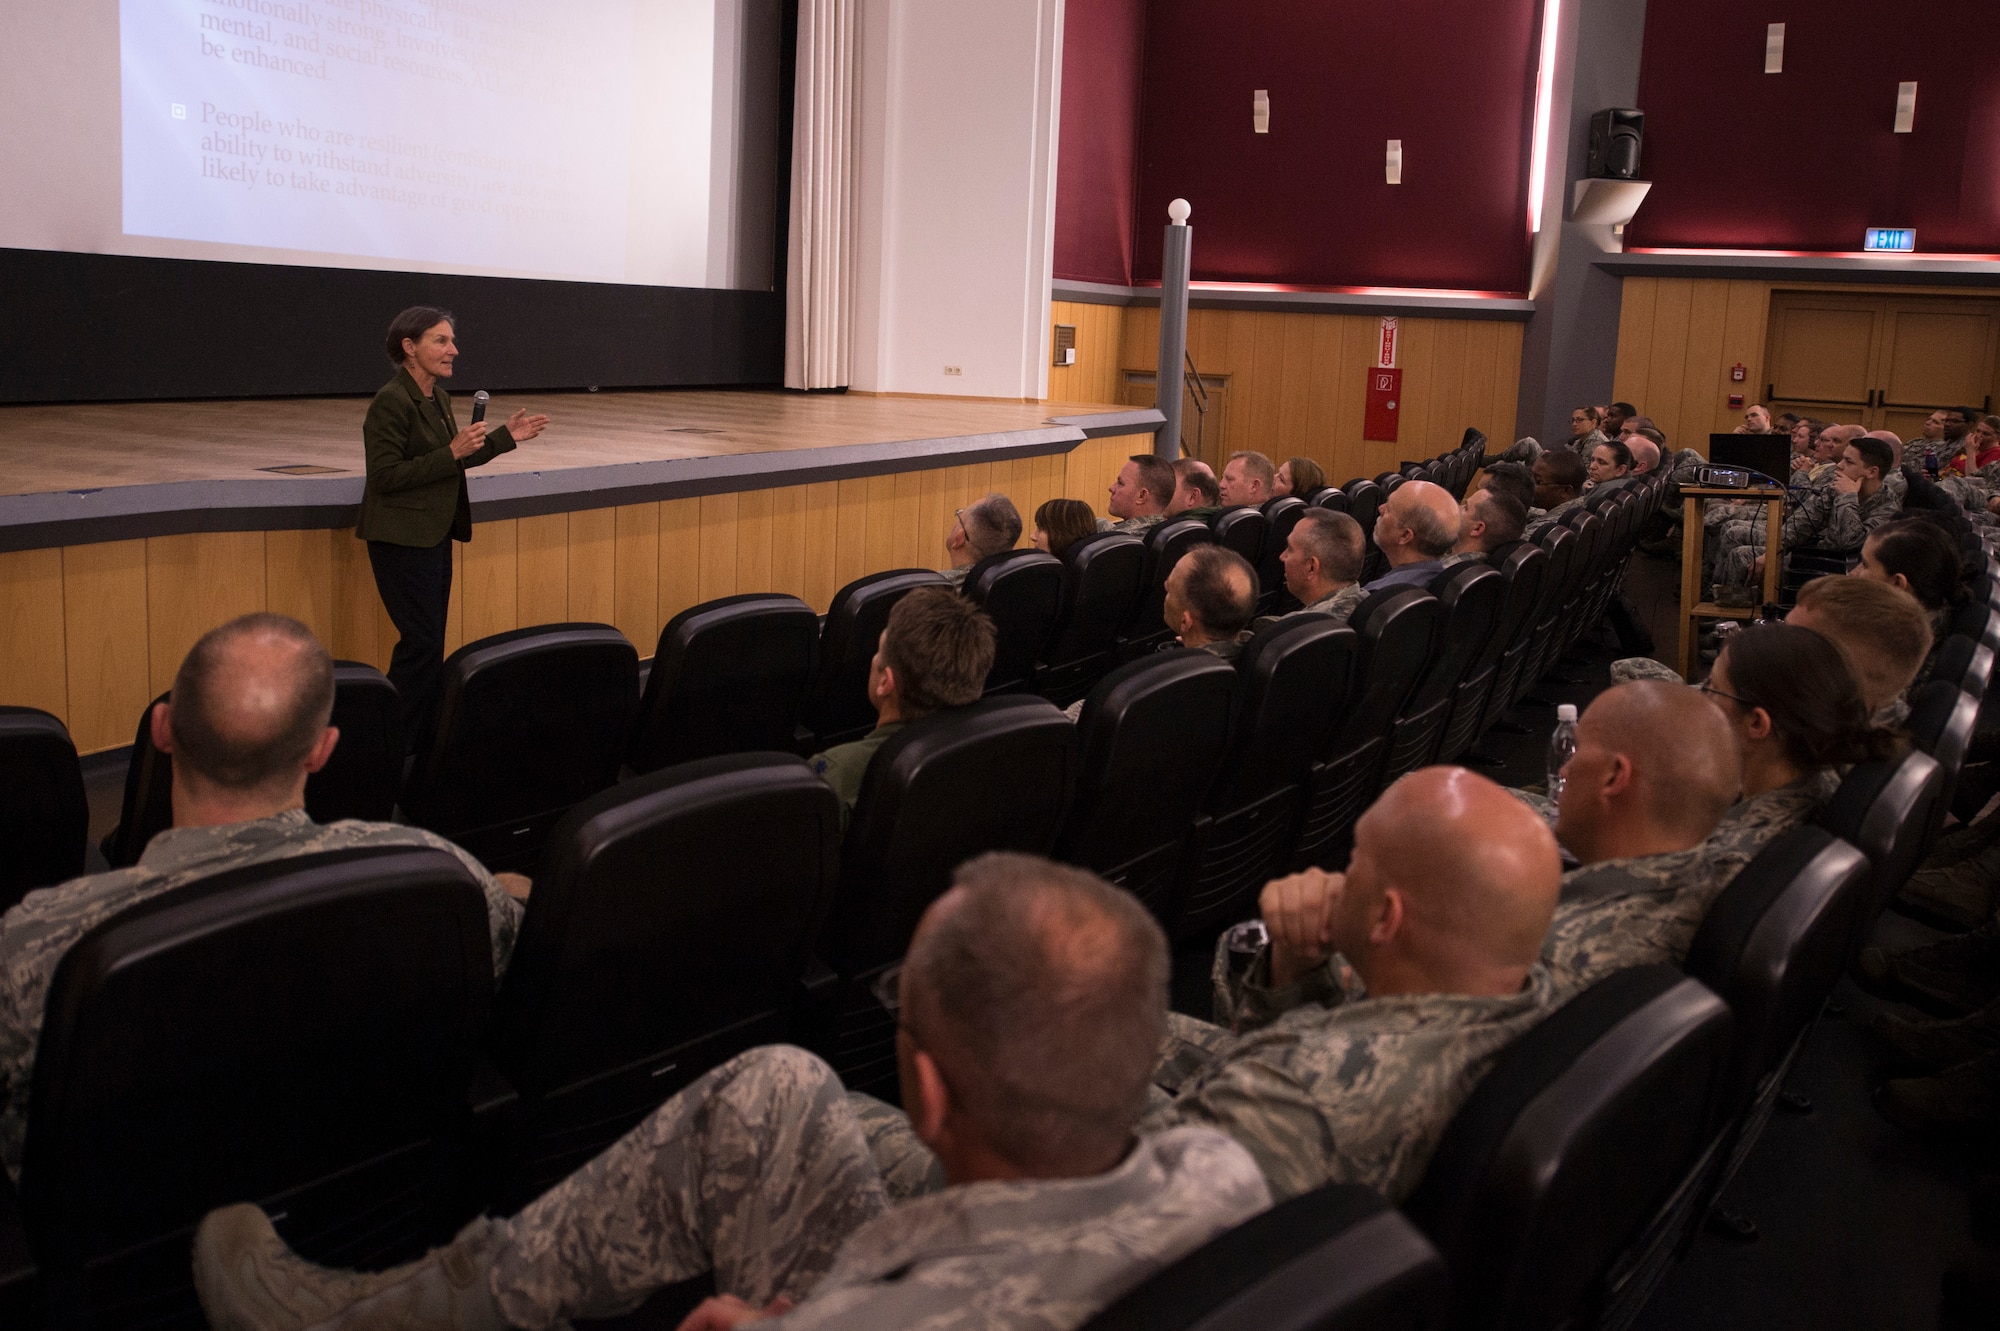 Retired U.S. Army Brig. Gen. Rhanda Cornum, a Department of Defense resiliency consultant, leads a discussion on resiliency at the base theater on Spangdahlem Air Base, Germany, June 4, 2015, during the 52nd Fighter Wing’s Resiliency Day. Cornum, spoke about her experiences as a decorated flight surgeon, helicopter pilot and being a former Prisoner of War during the Persian Gulf War as part of her presentation on resiliency. (U.S. Air force photo by Staff Sgt. Christopher Ruano/Released)